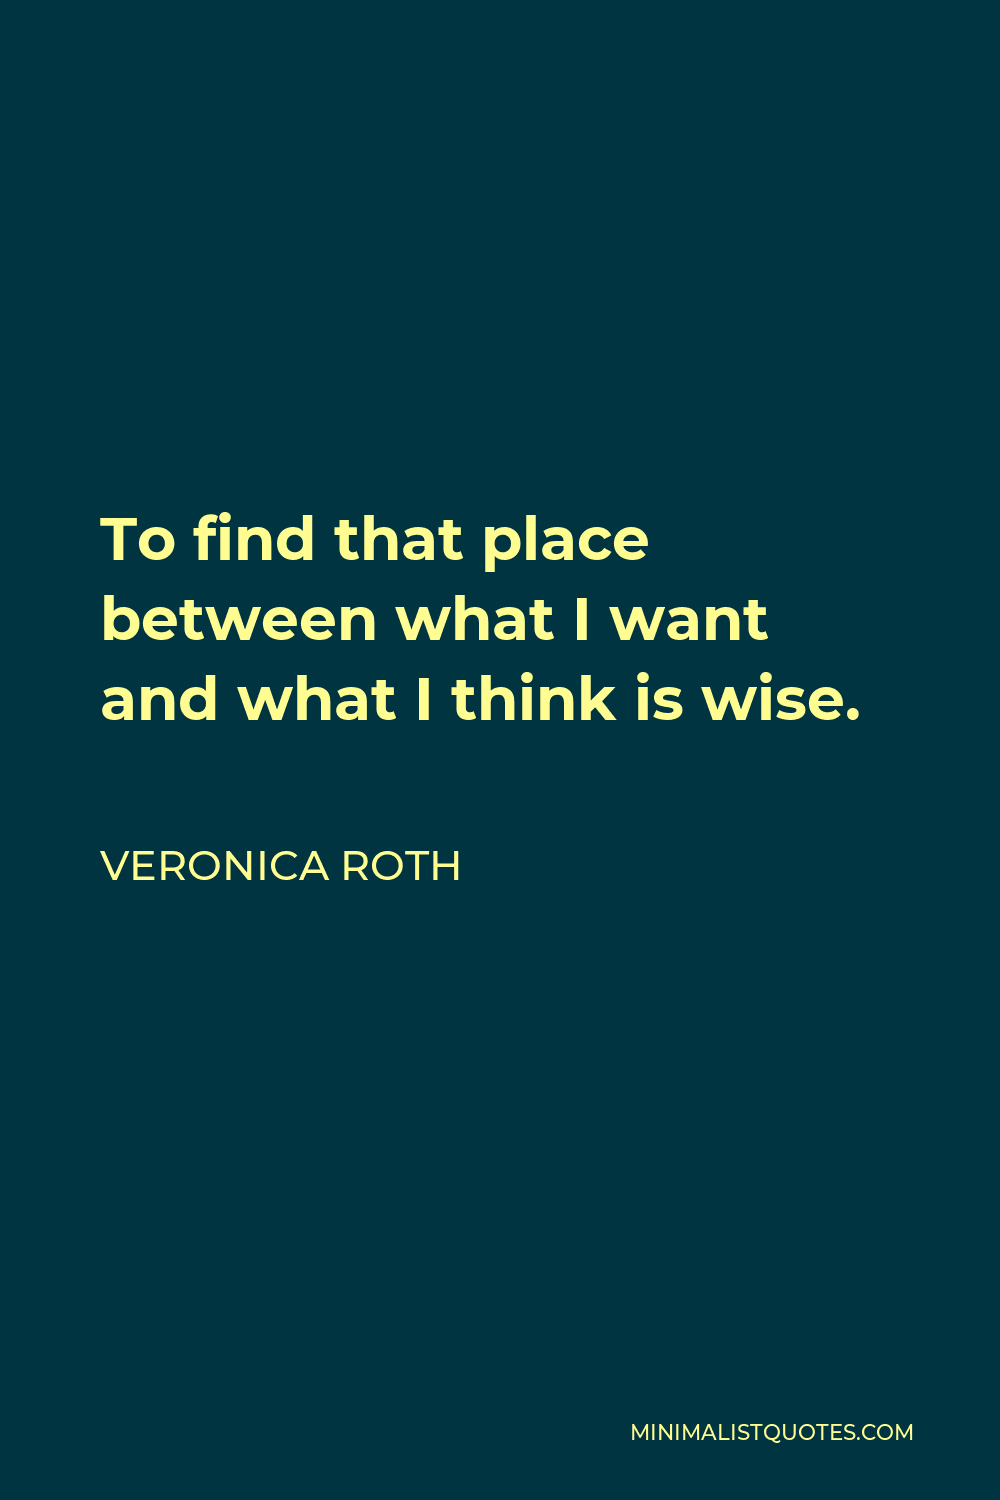 Veronica Roth Quote - To find that place between what I want and what I think is wise.